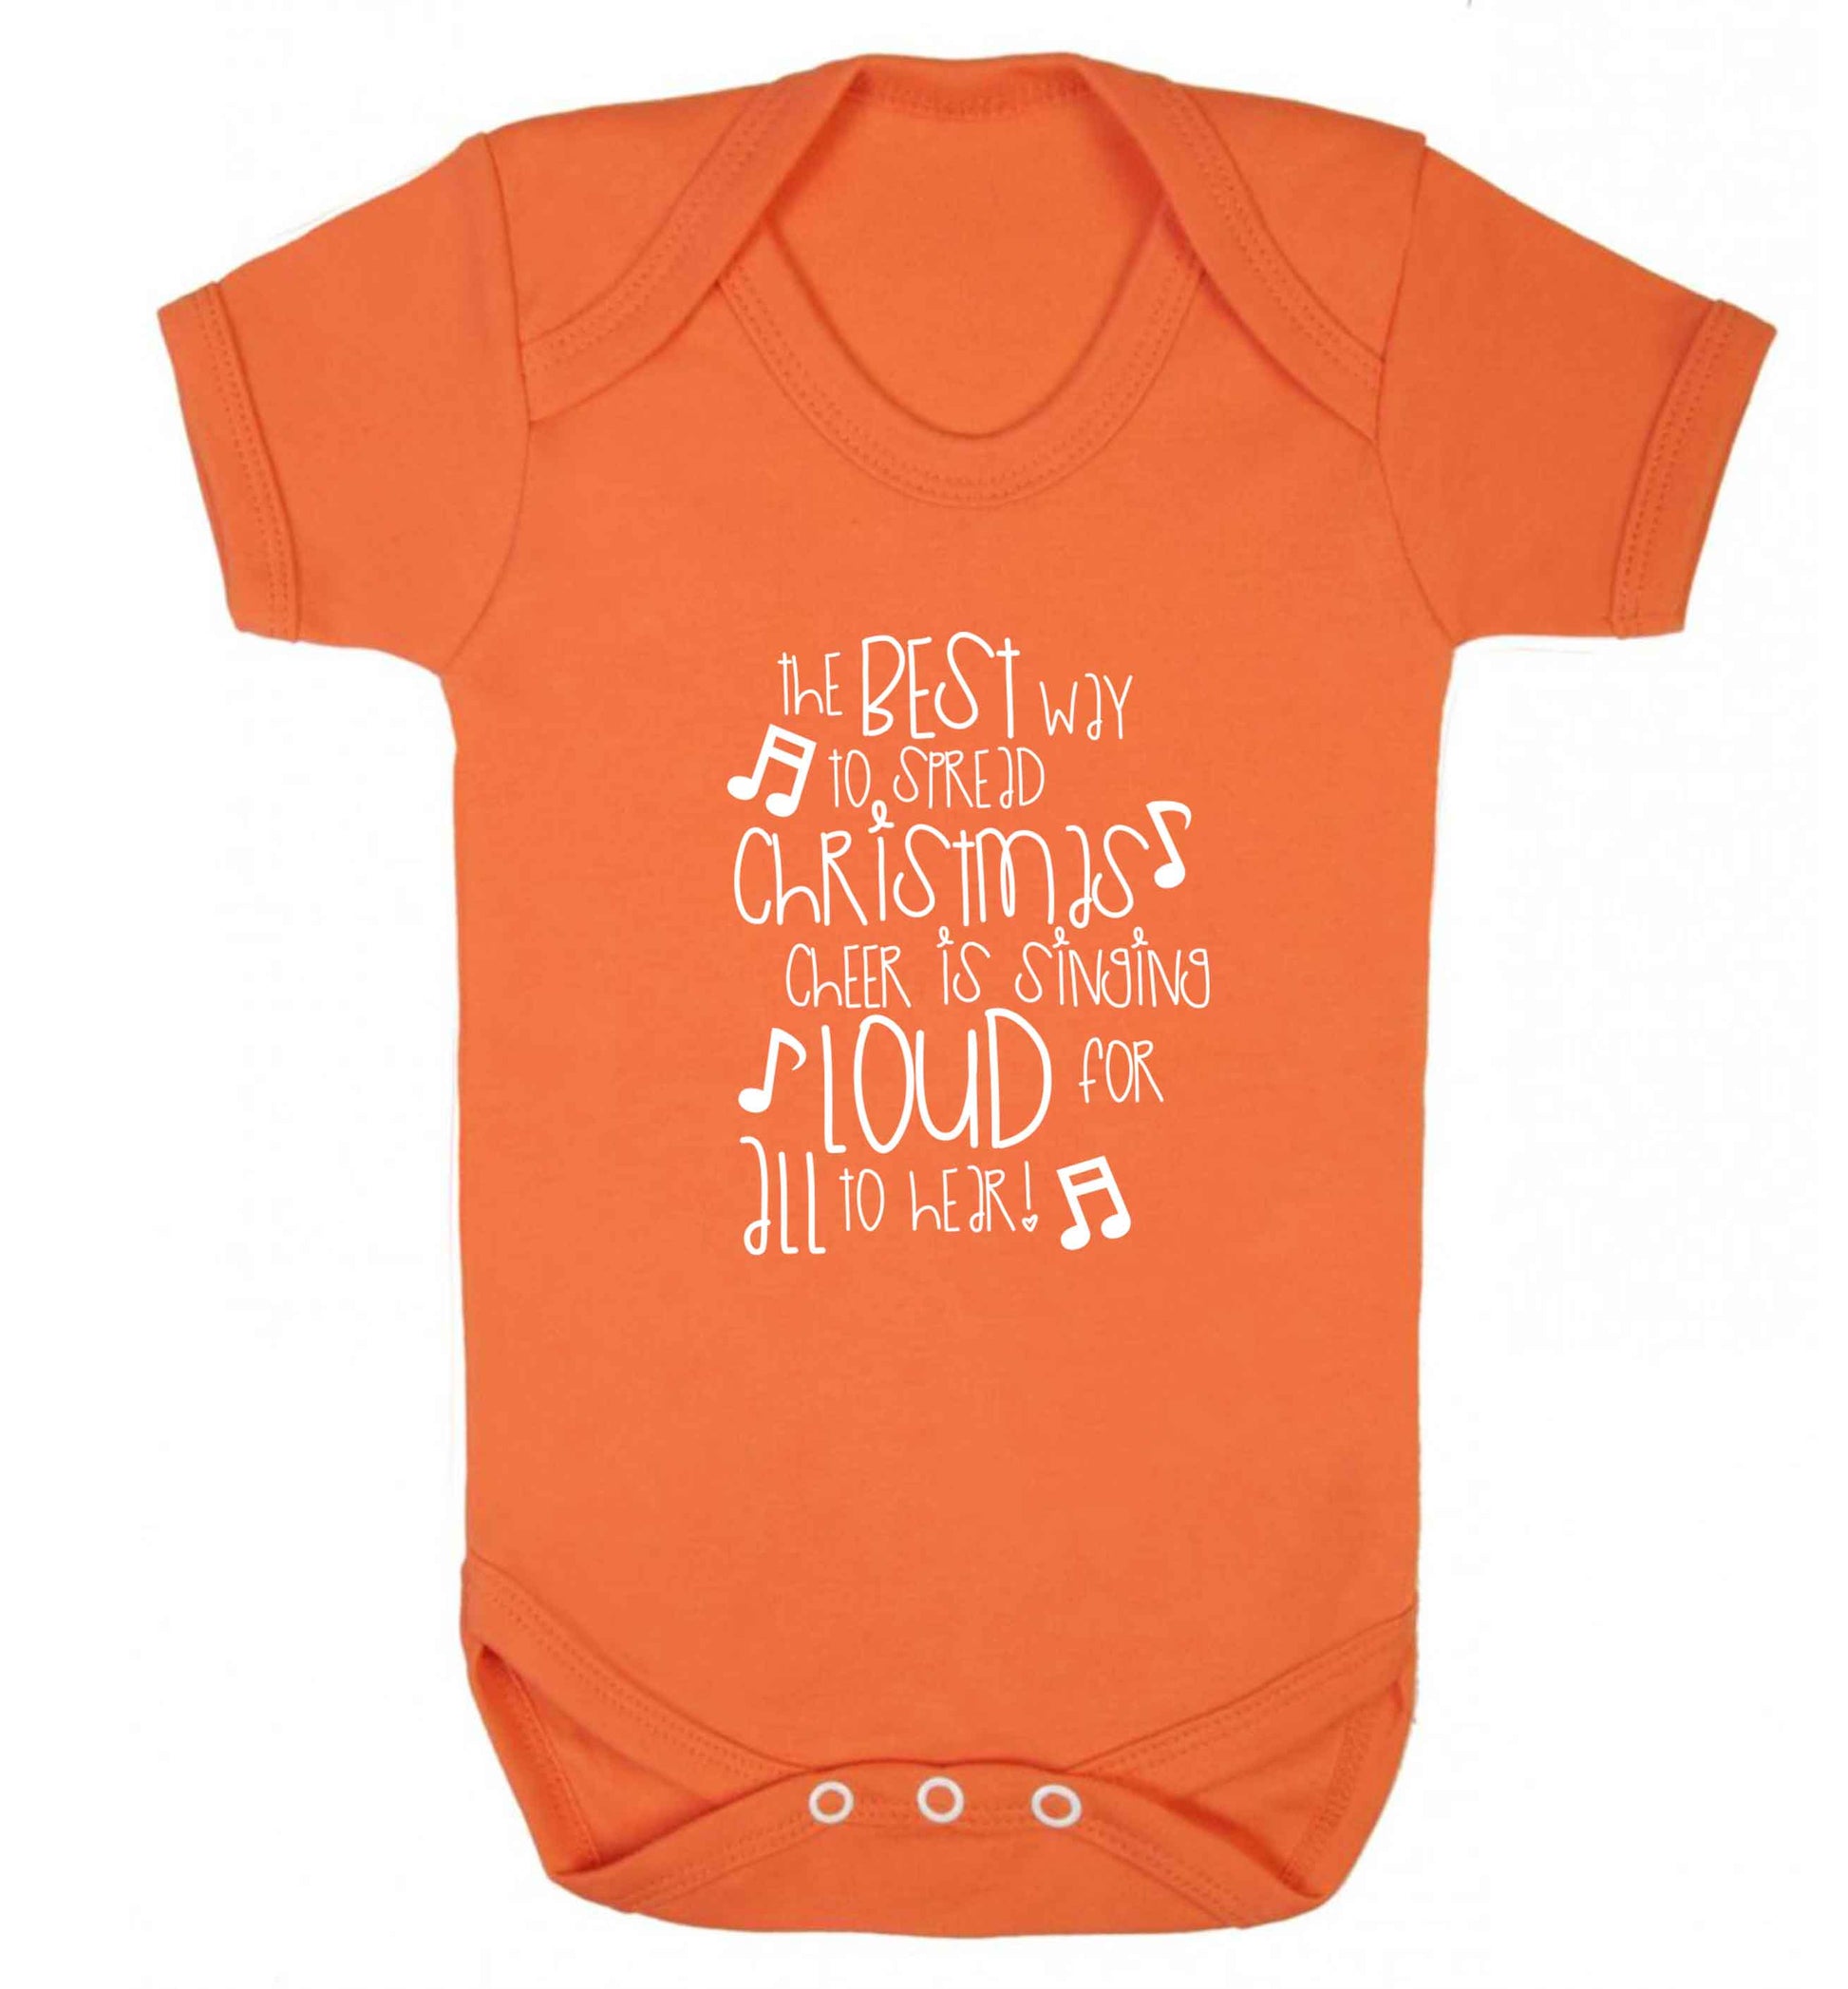 The best way to spread Christmas cheer is singing loud for all to hear baby vest orange 18-24 months